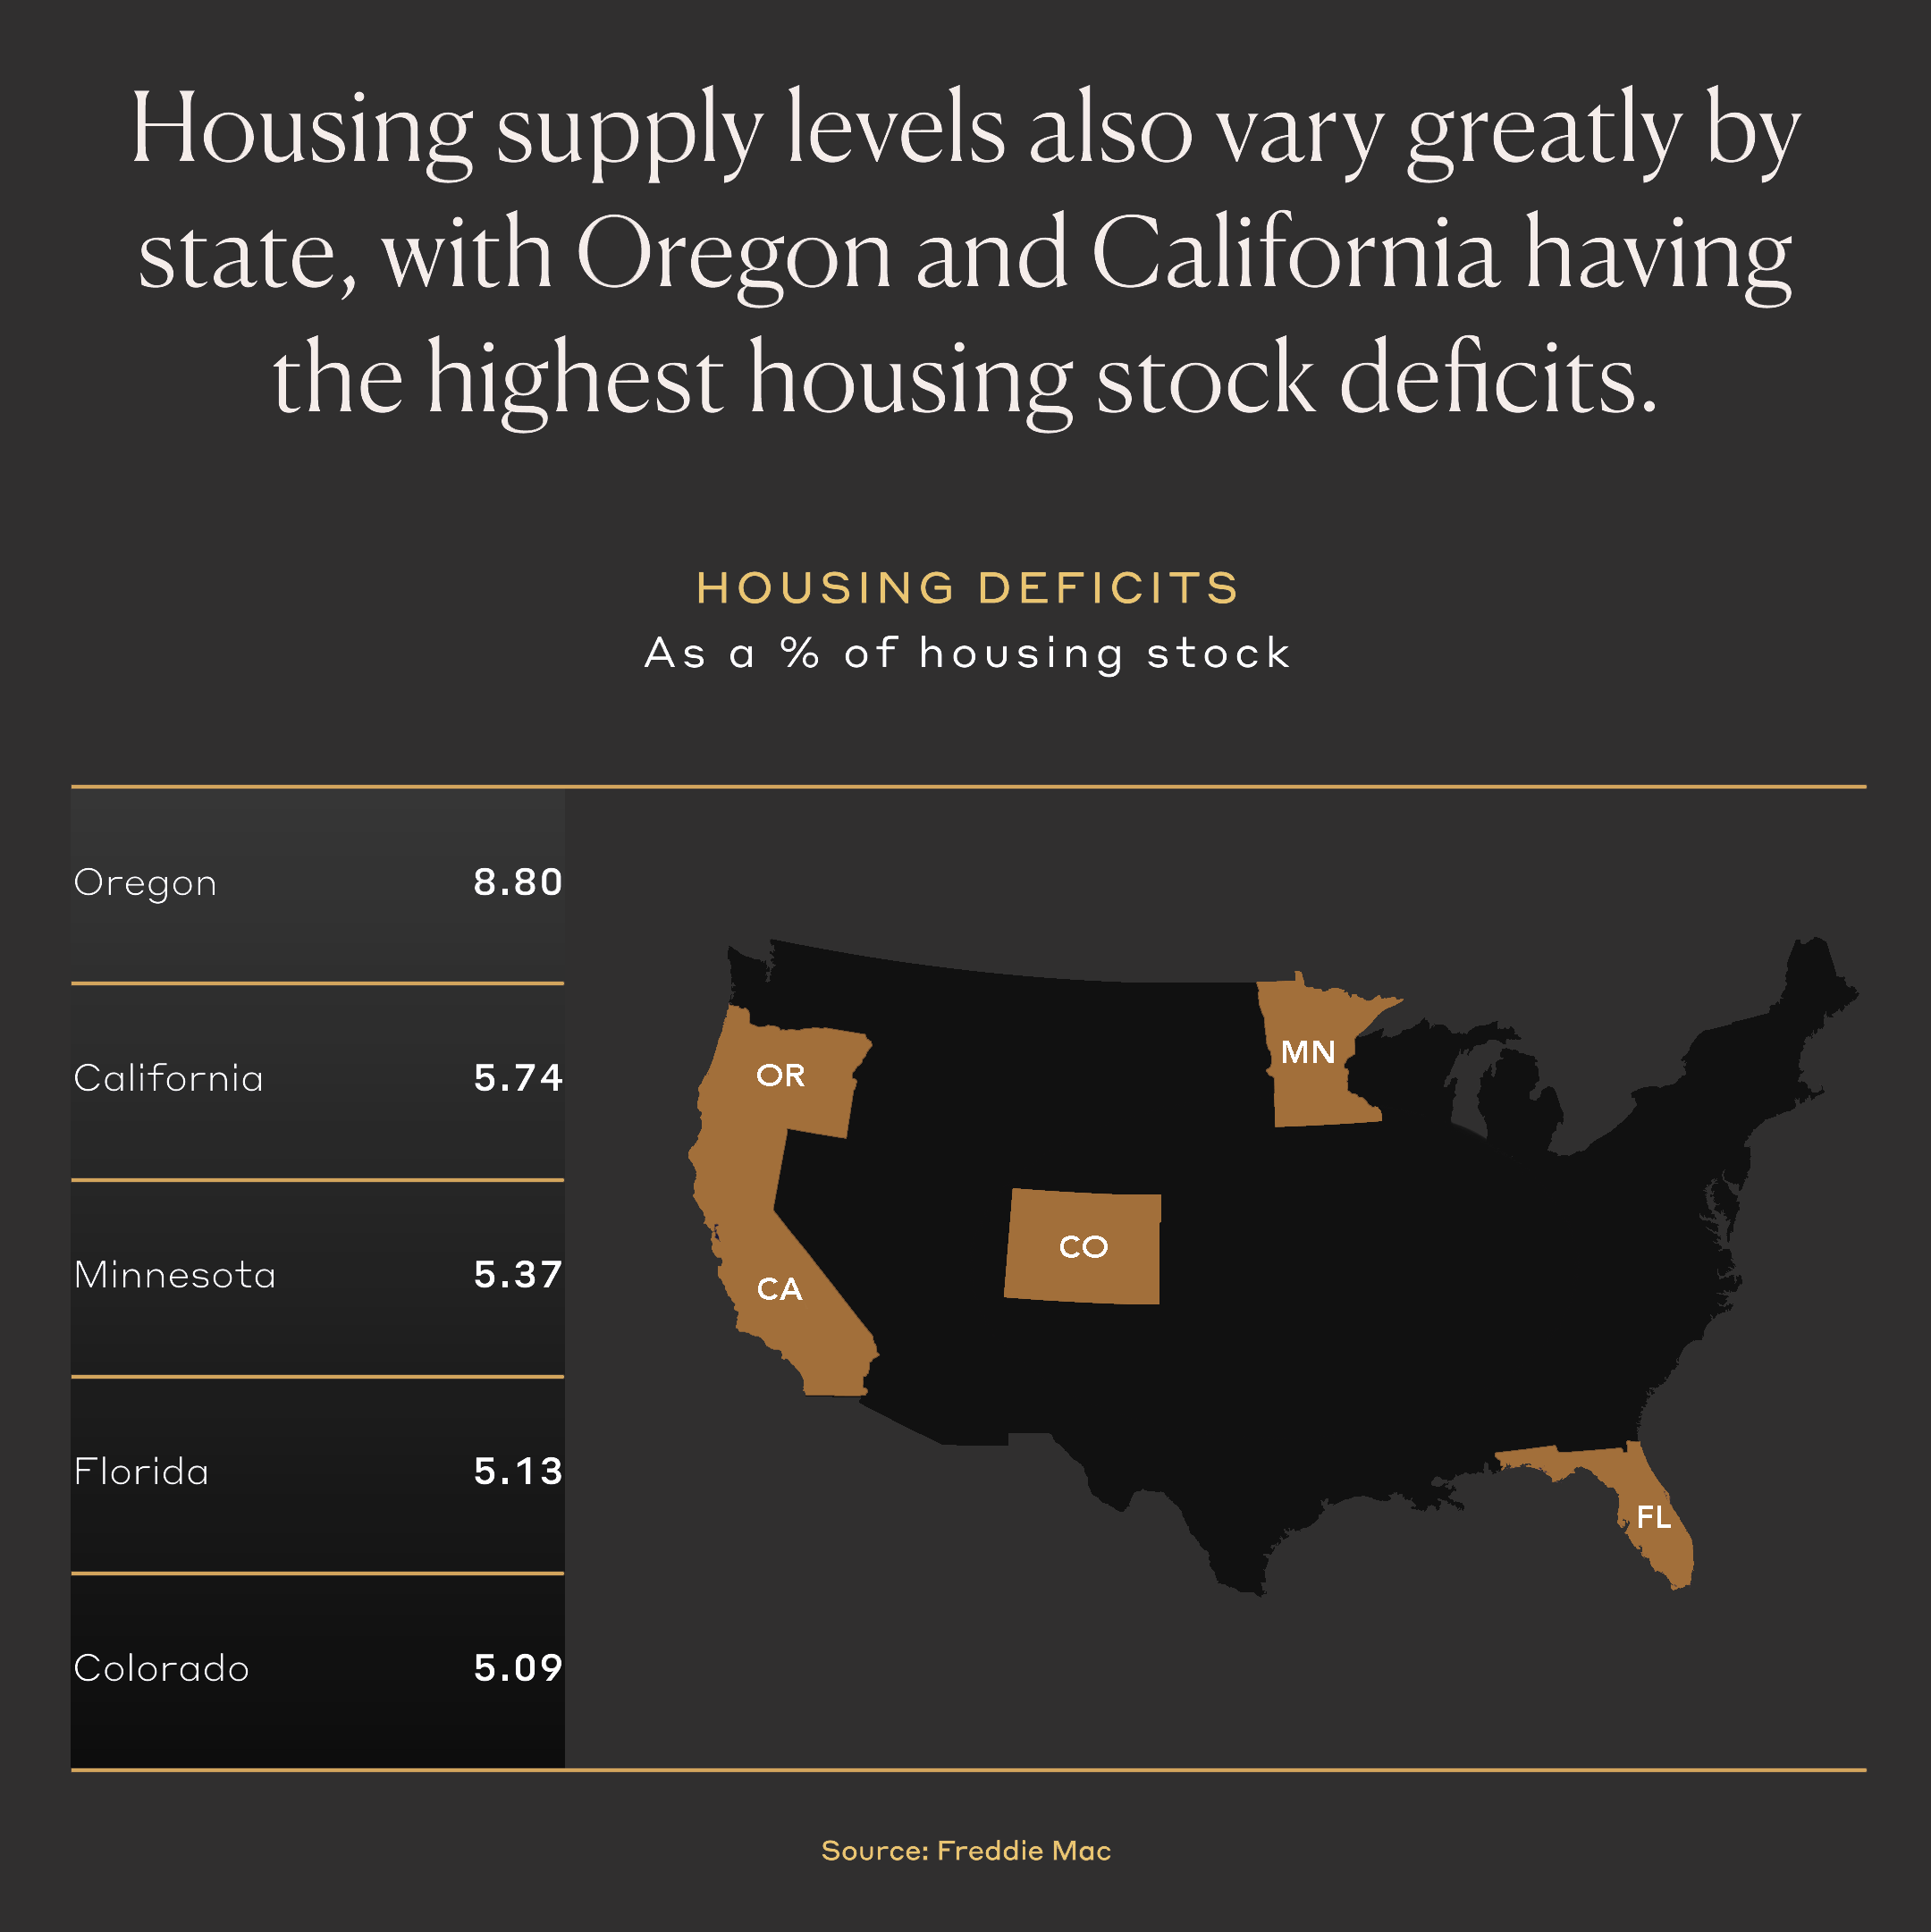 Housing supply levels also vary greatly by state, with Oregon and California having the highest housing stock deficits.